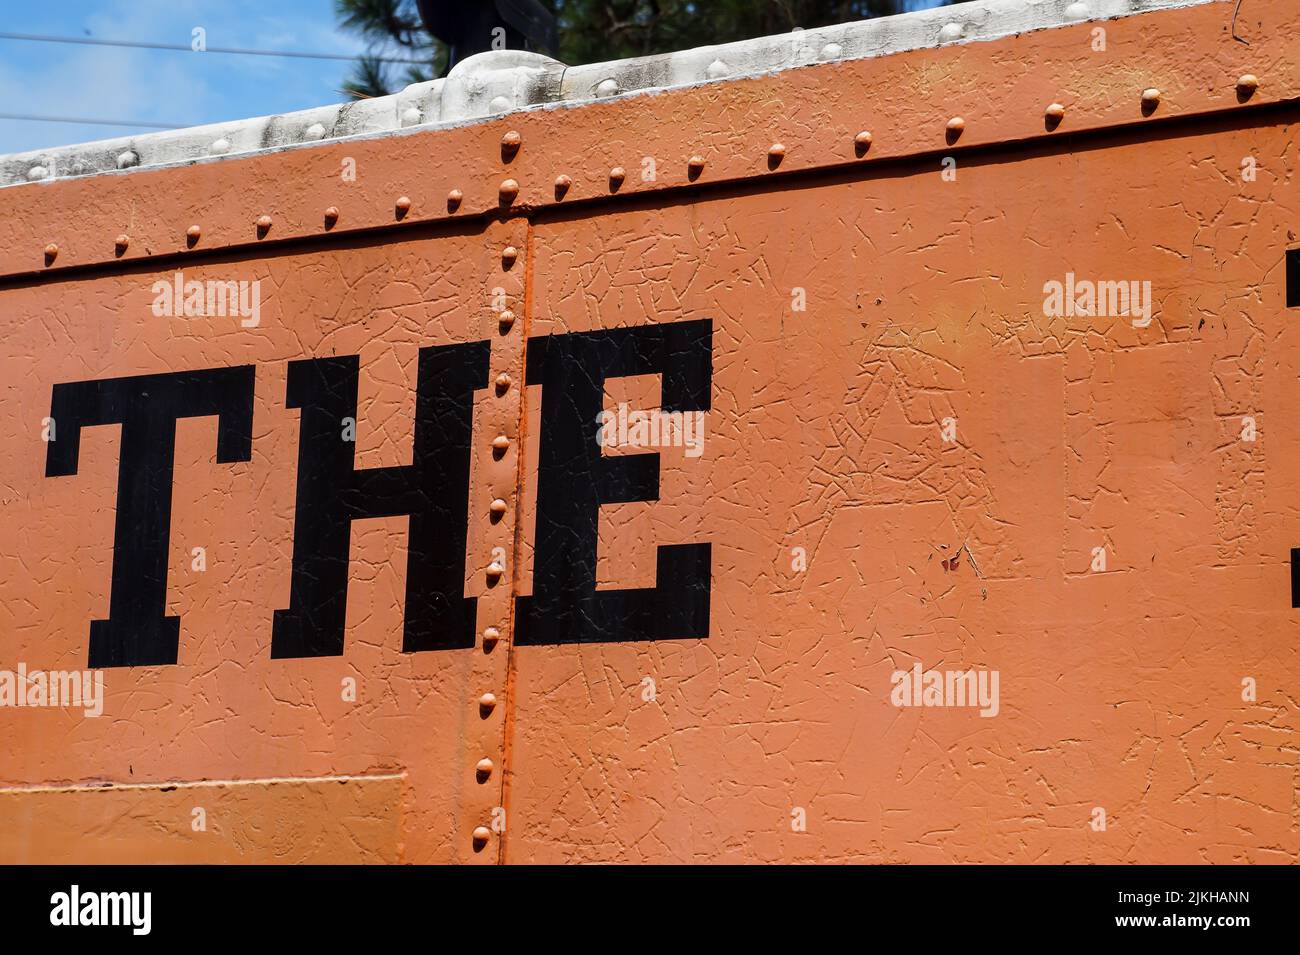 A closeup shot of a painted 'THE' sign on an orange metal wall Stock Photo